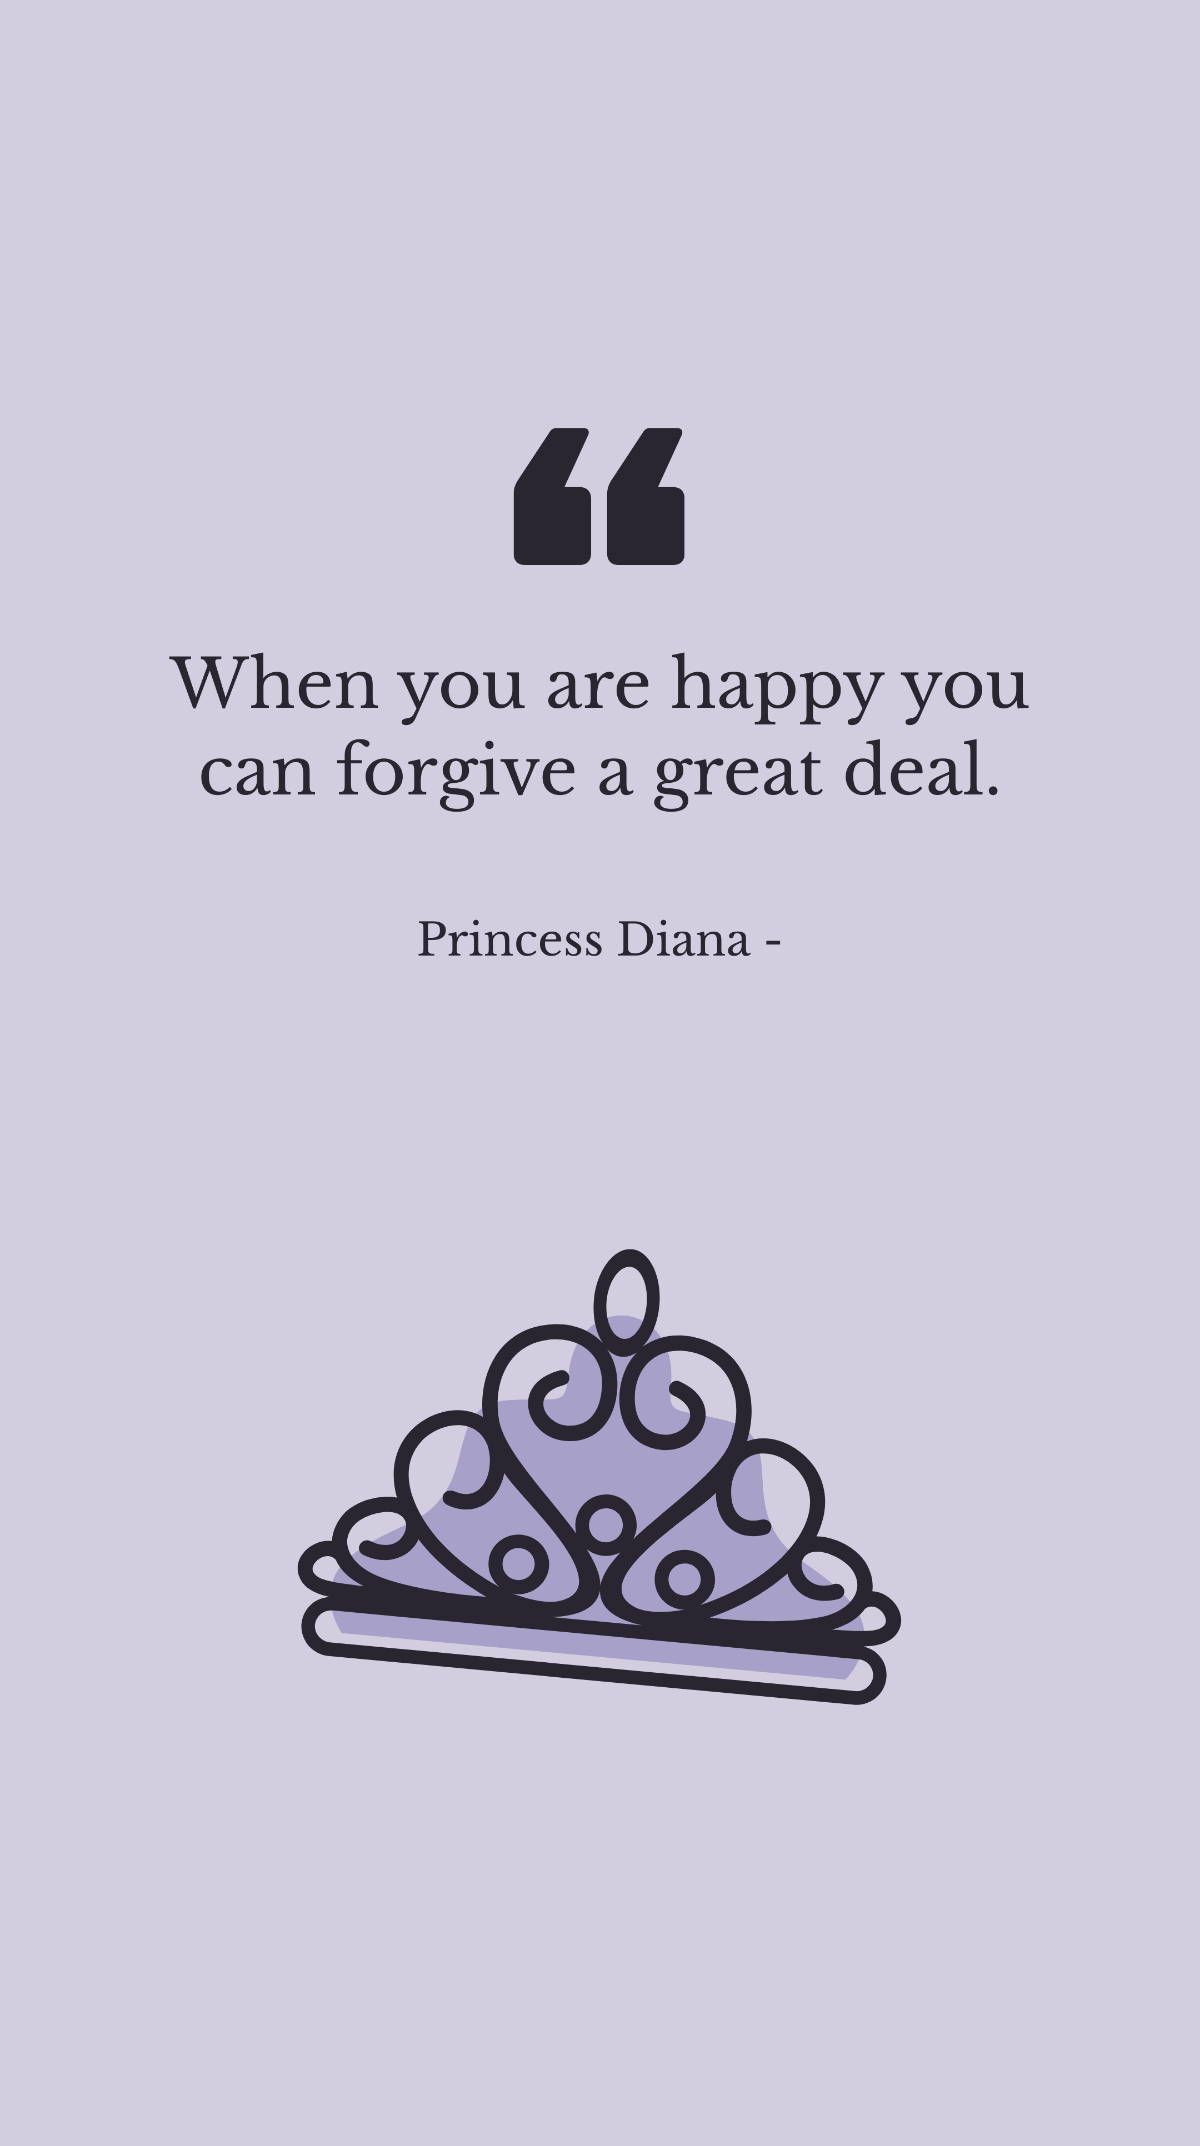 Princess Diana - When you are happy you can forgive a great deal. Template